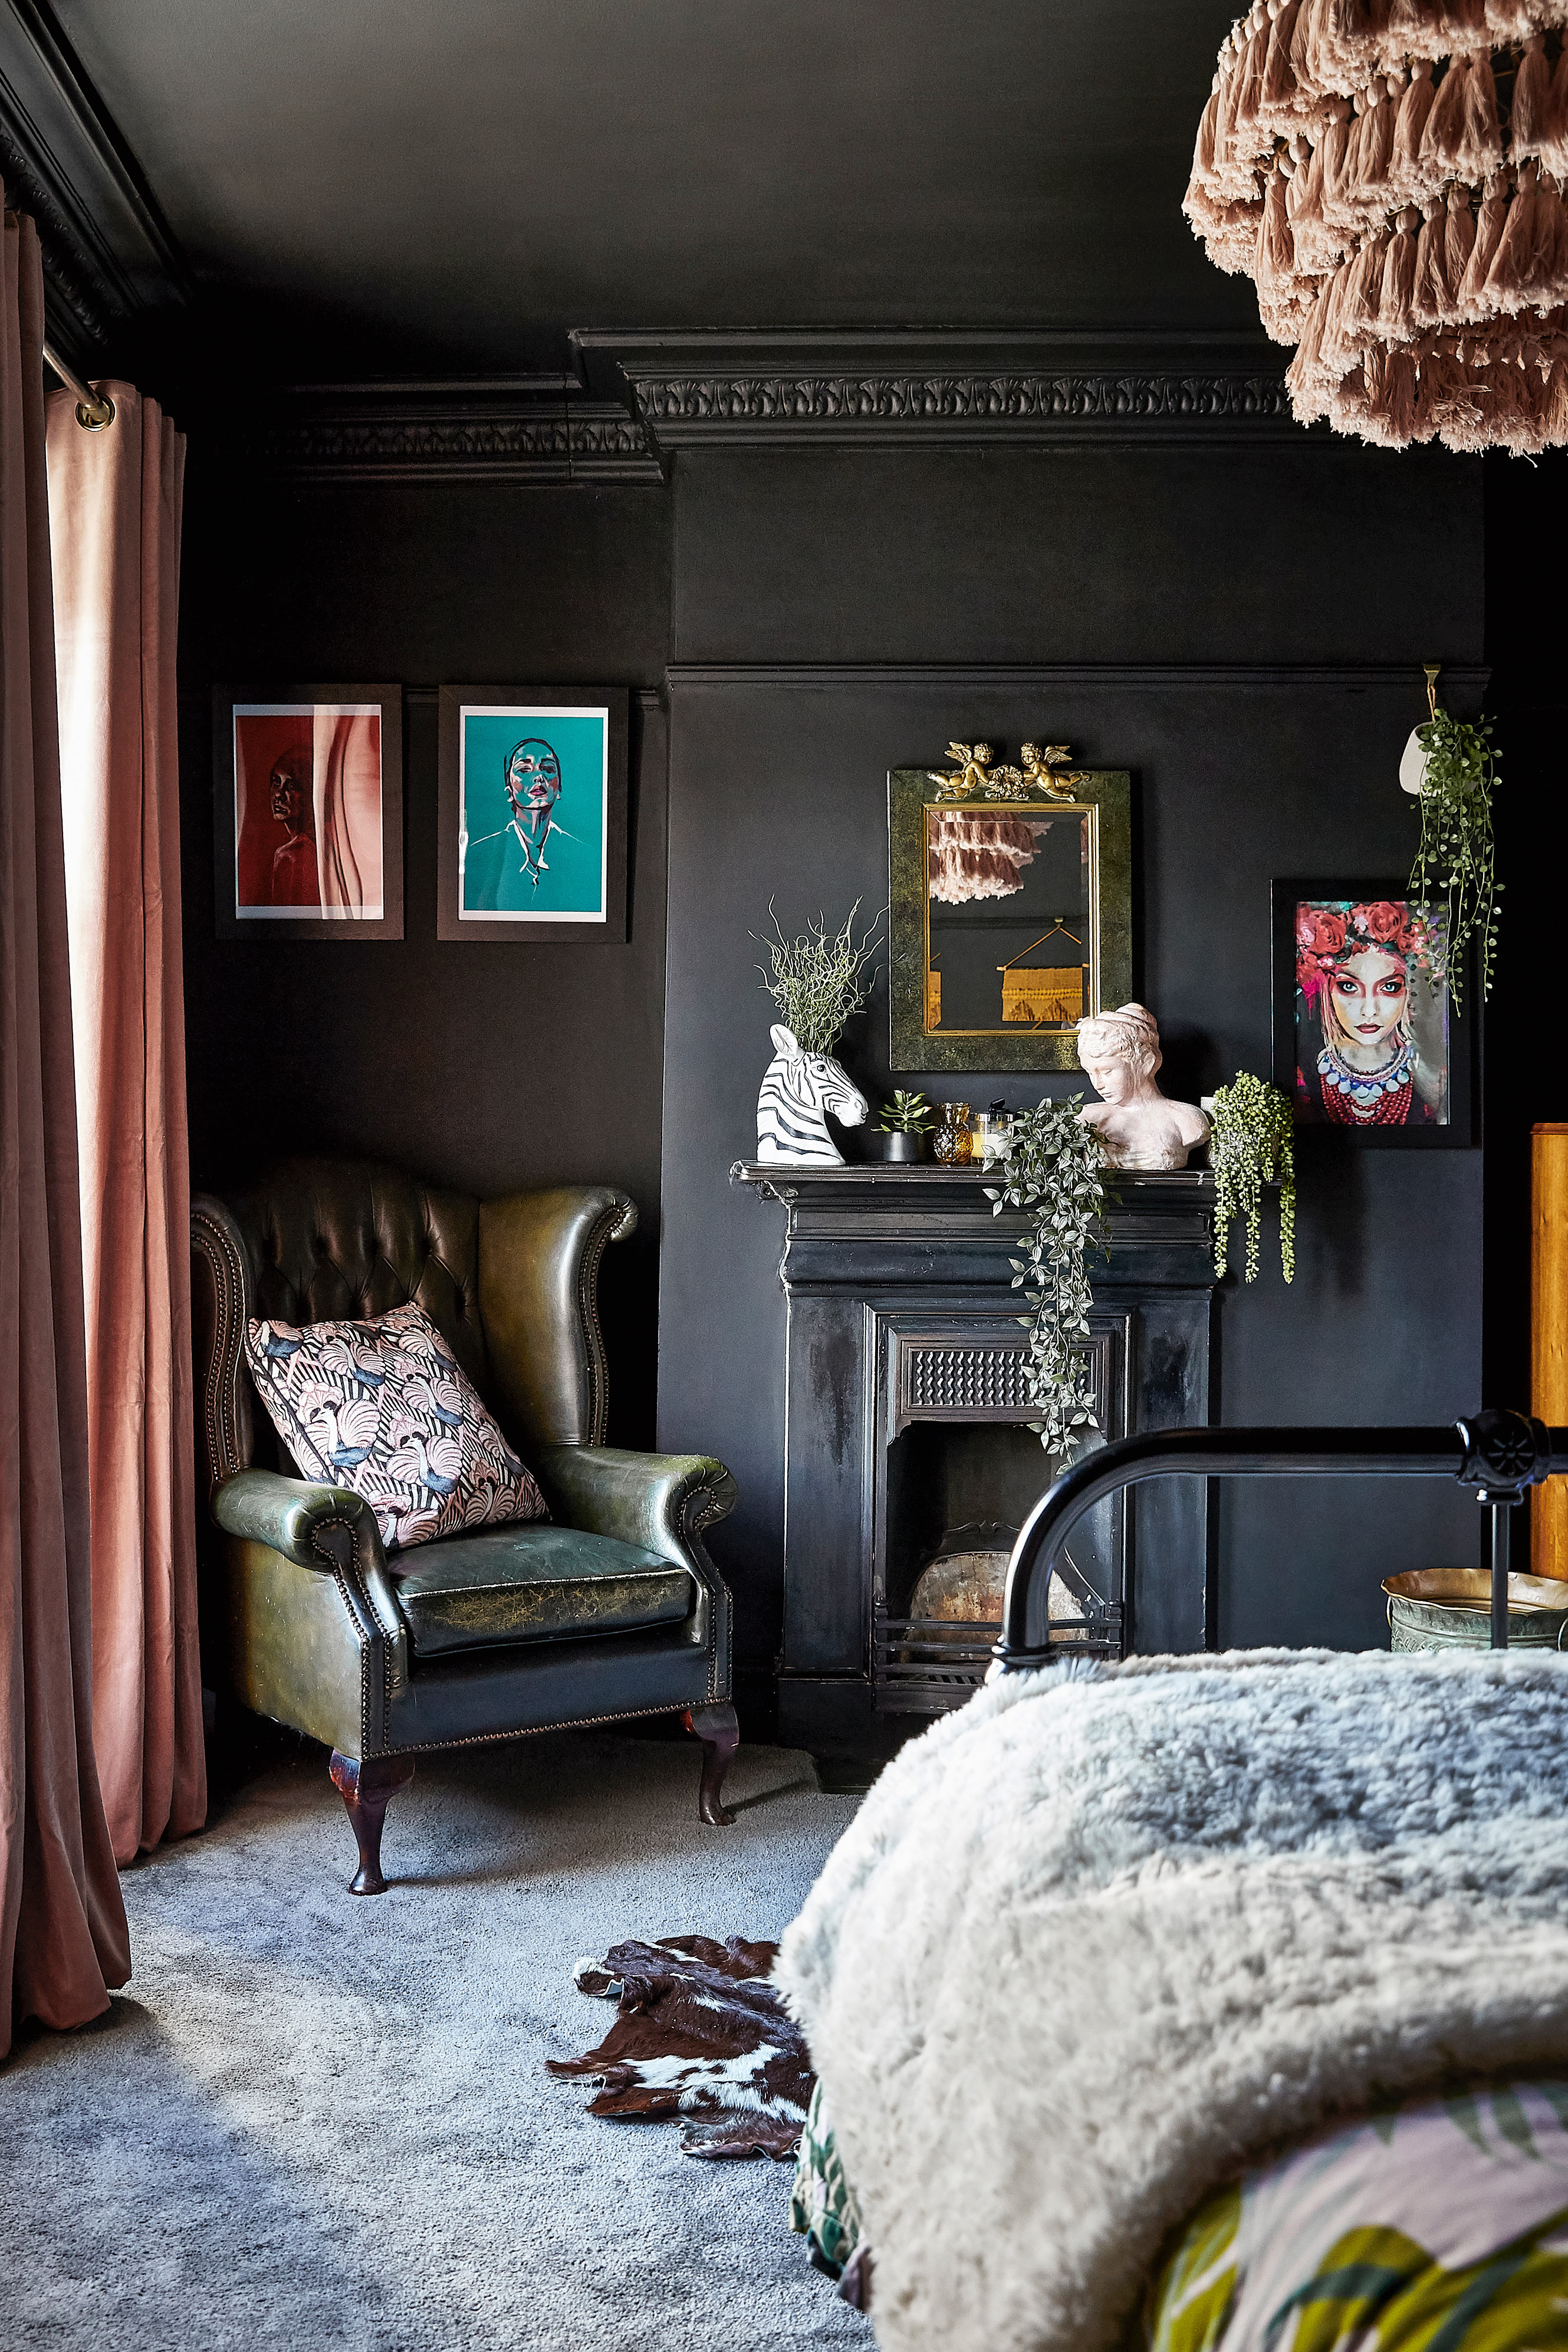 A black bedroom with painted walls and ceilings, framed wall art and and antique chair in corner